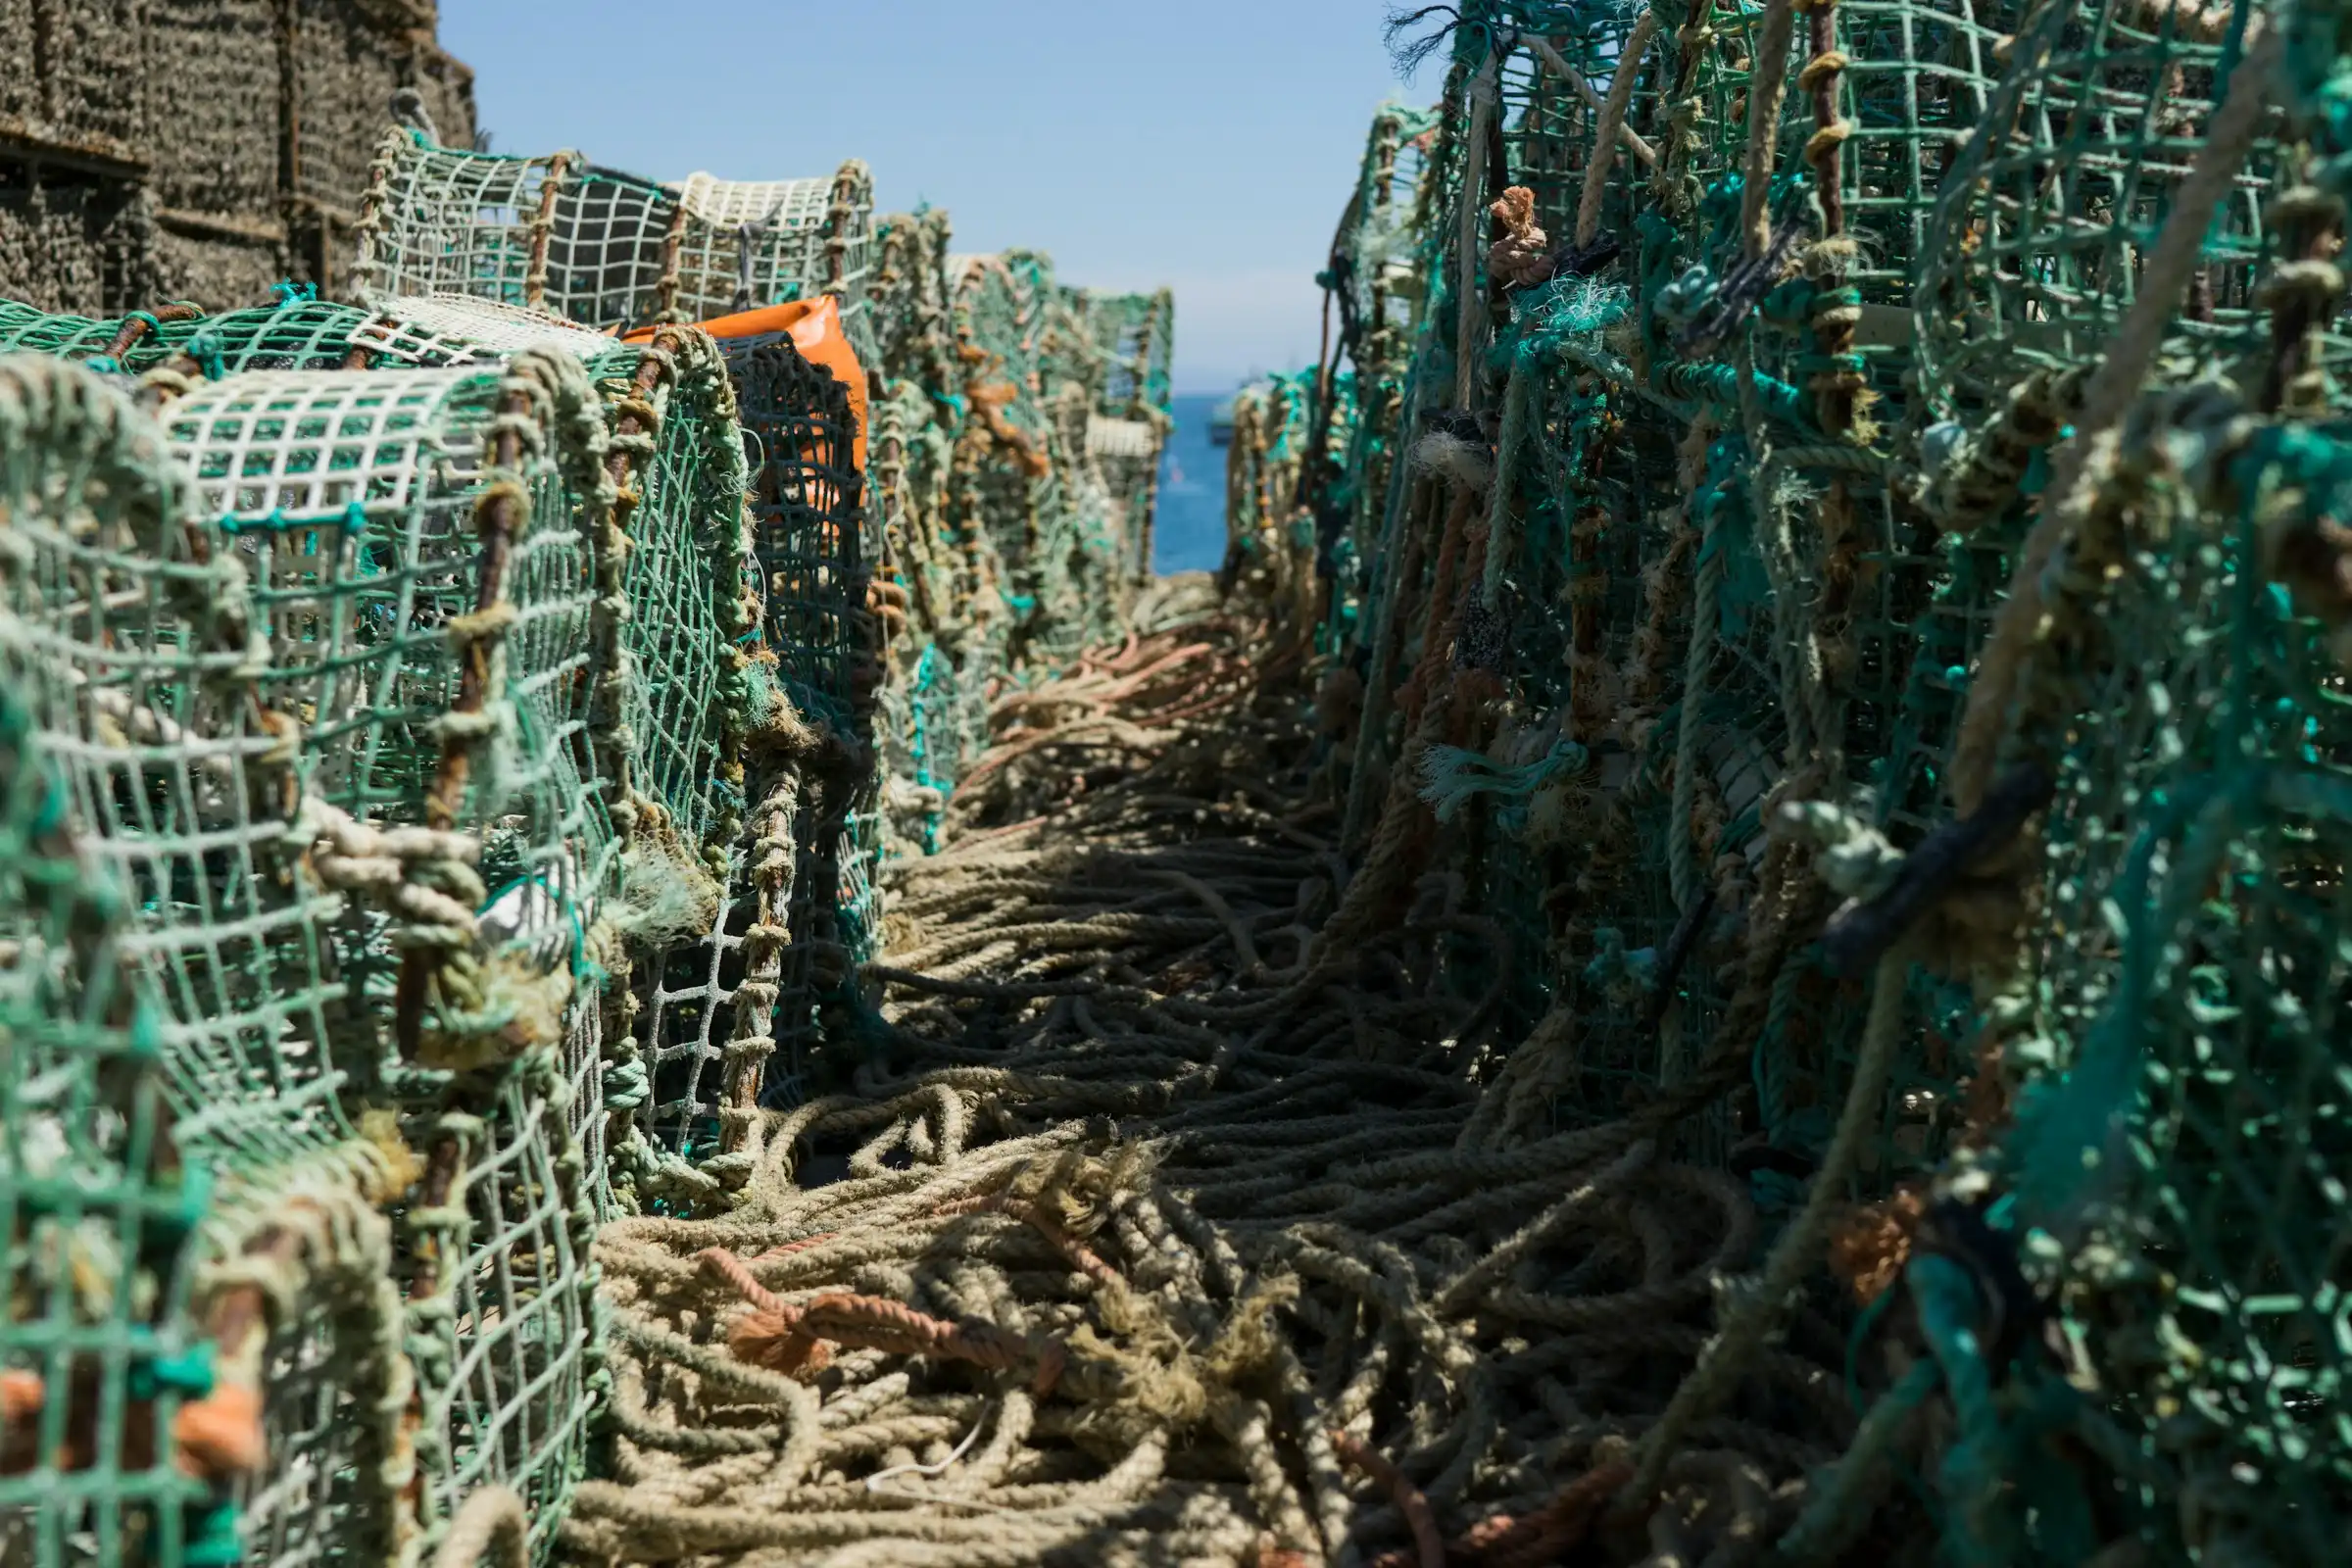 Green and white rope lobster cages stacked.